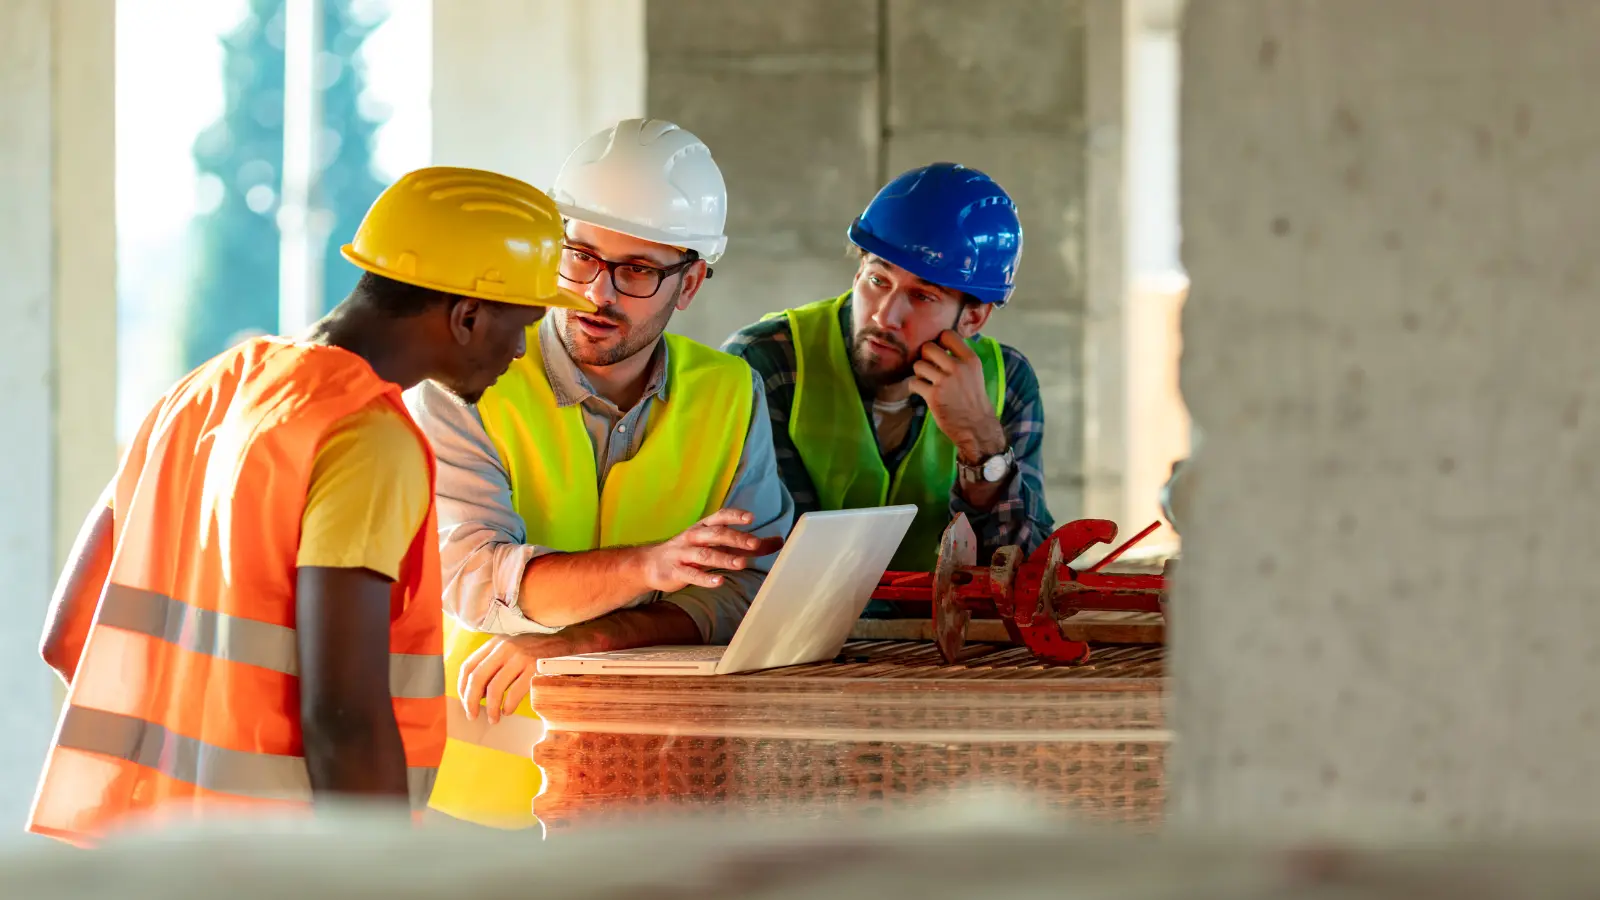 How can knowing about the construction playbook benefit my tenders?